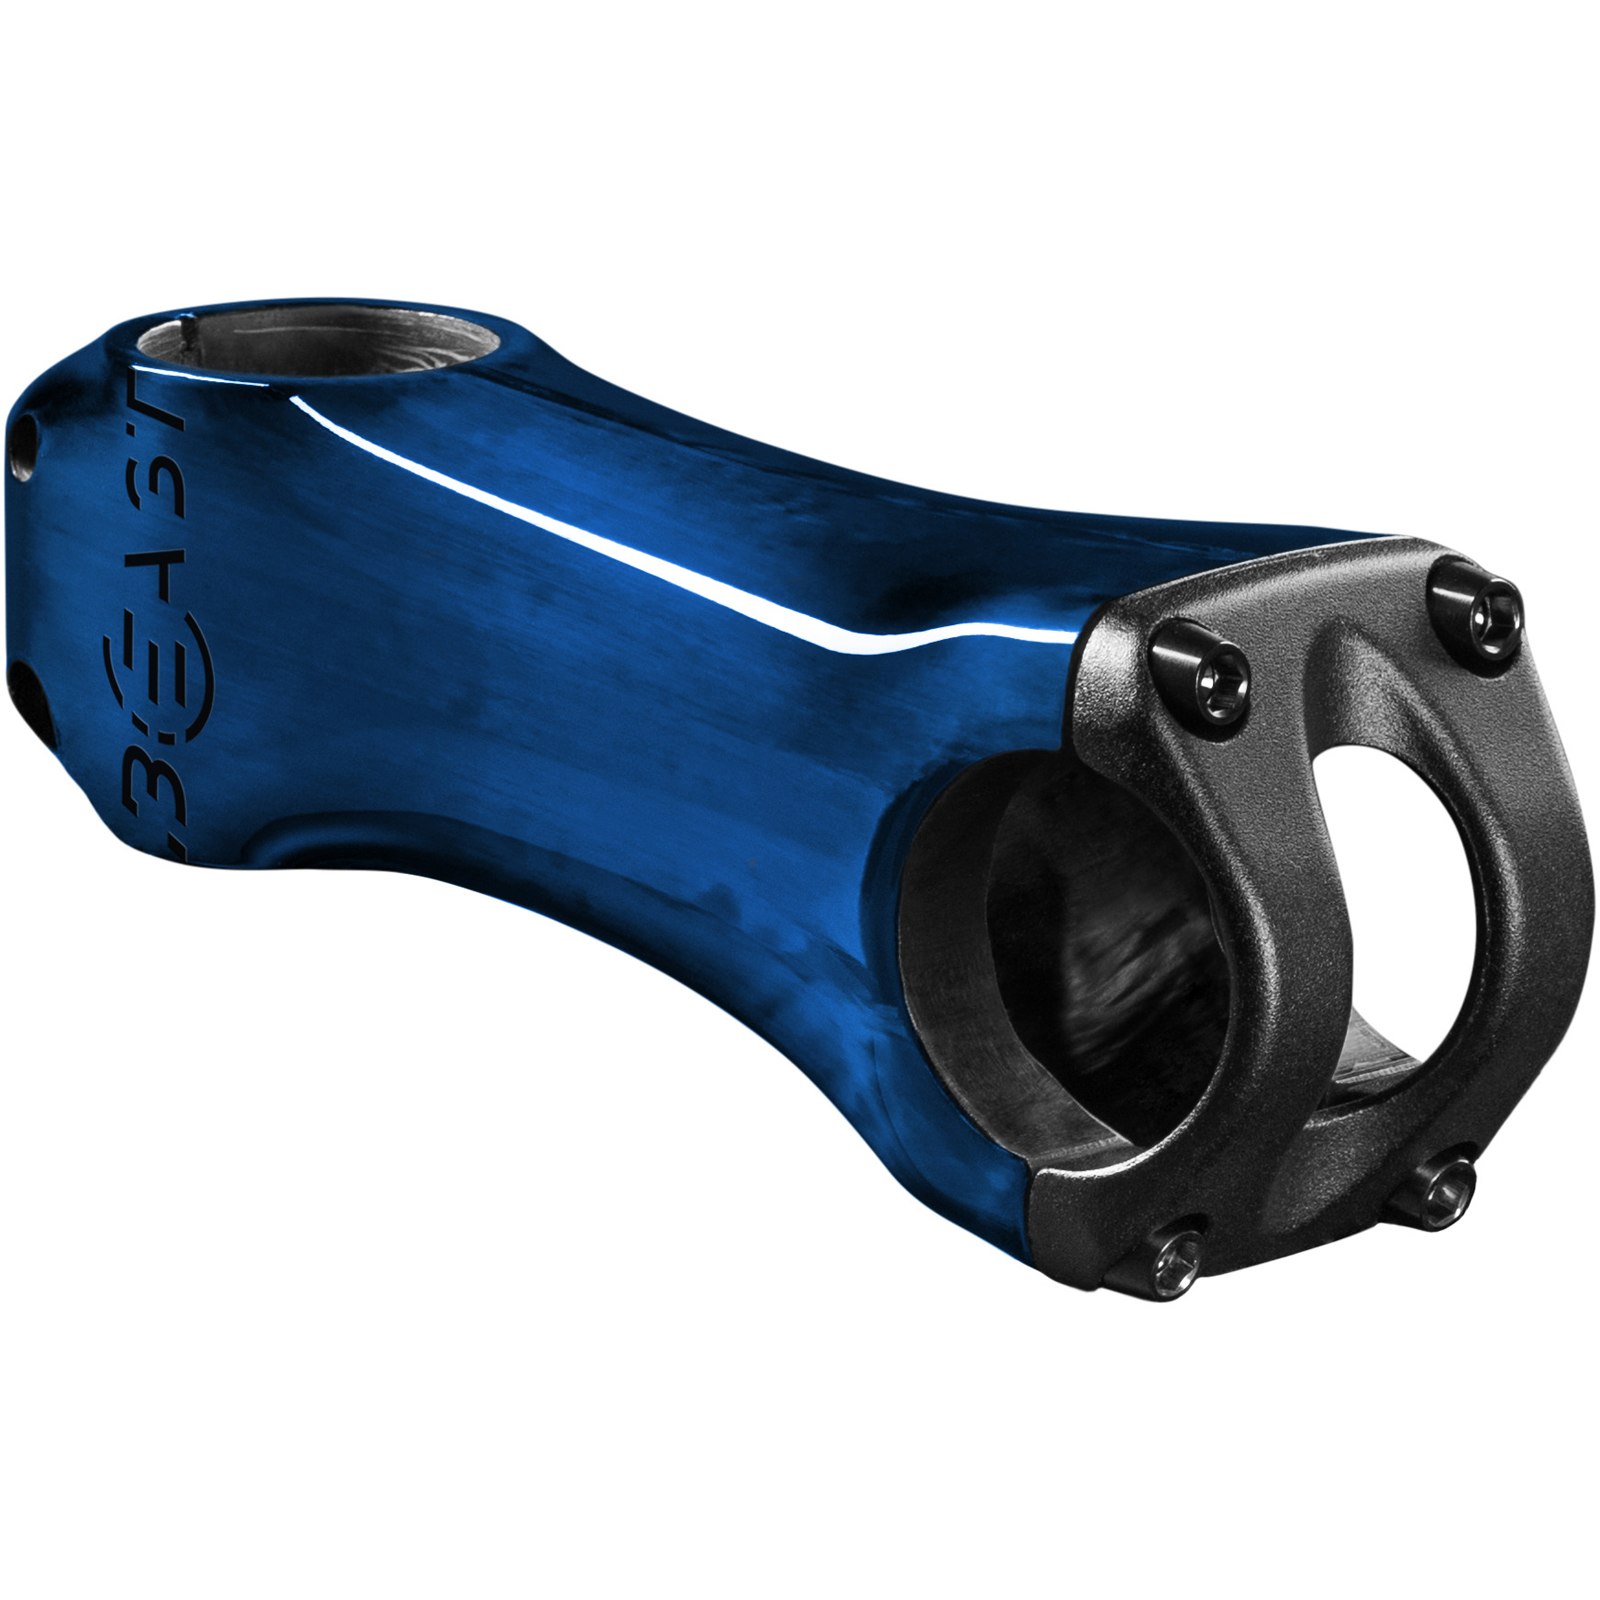 Picture of Beast Components Road Carbon Stem 31.8mm - 6° - UD blue